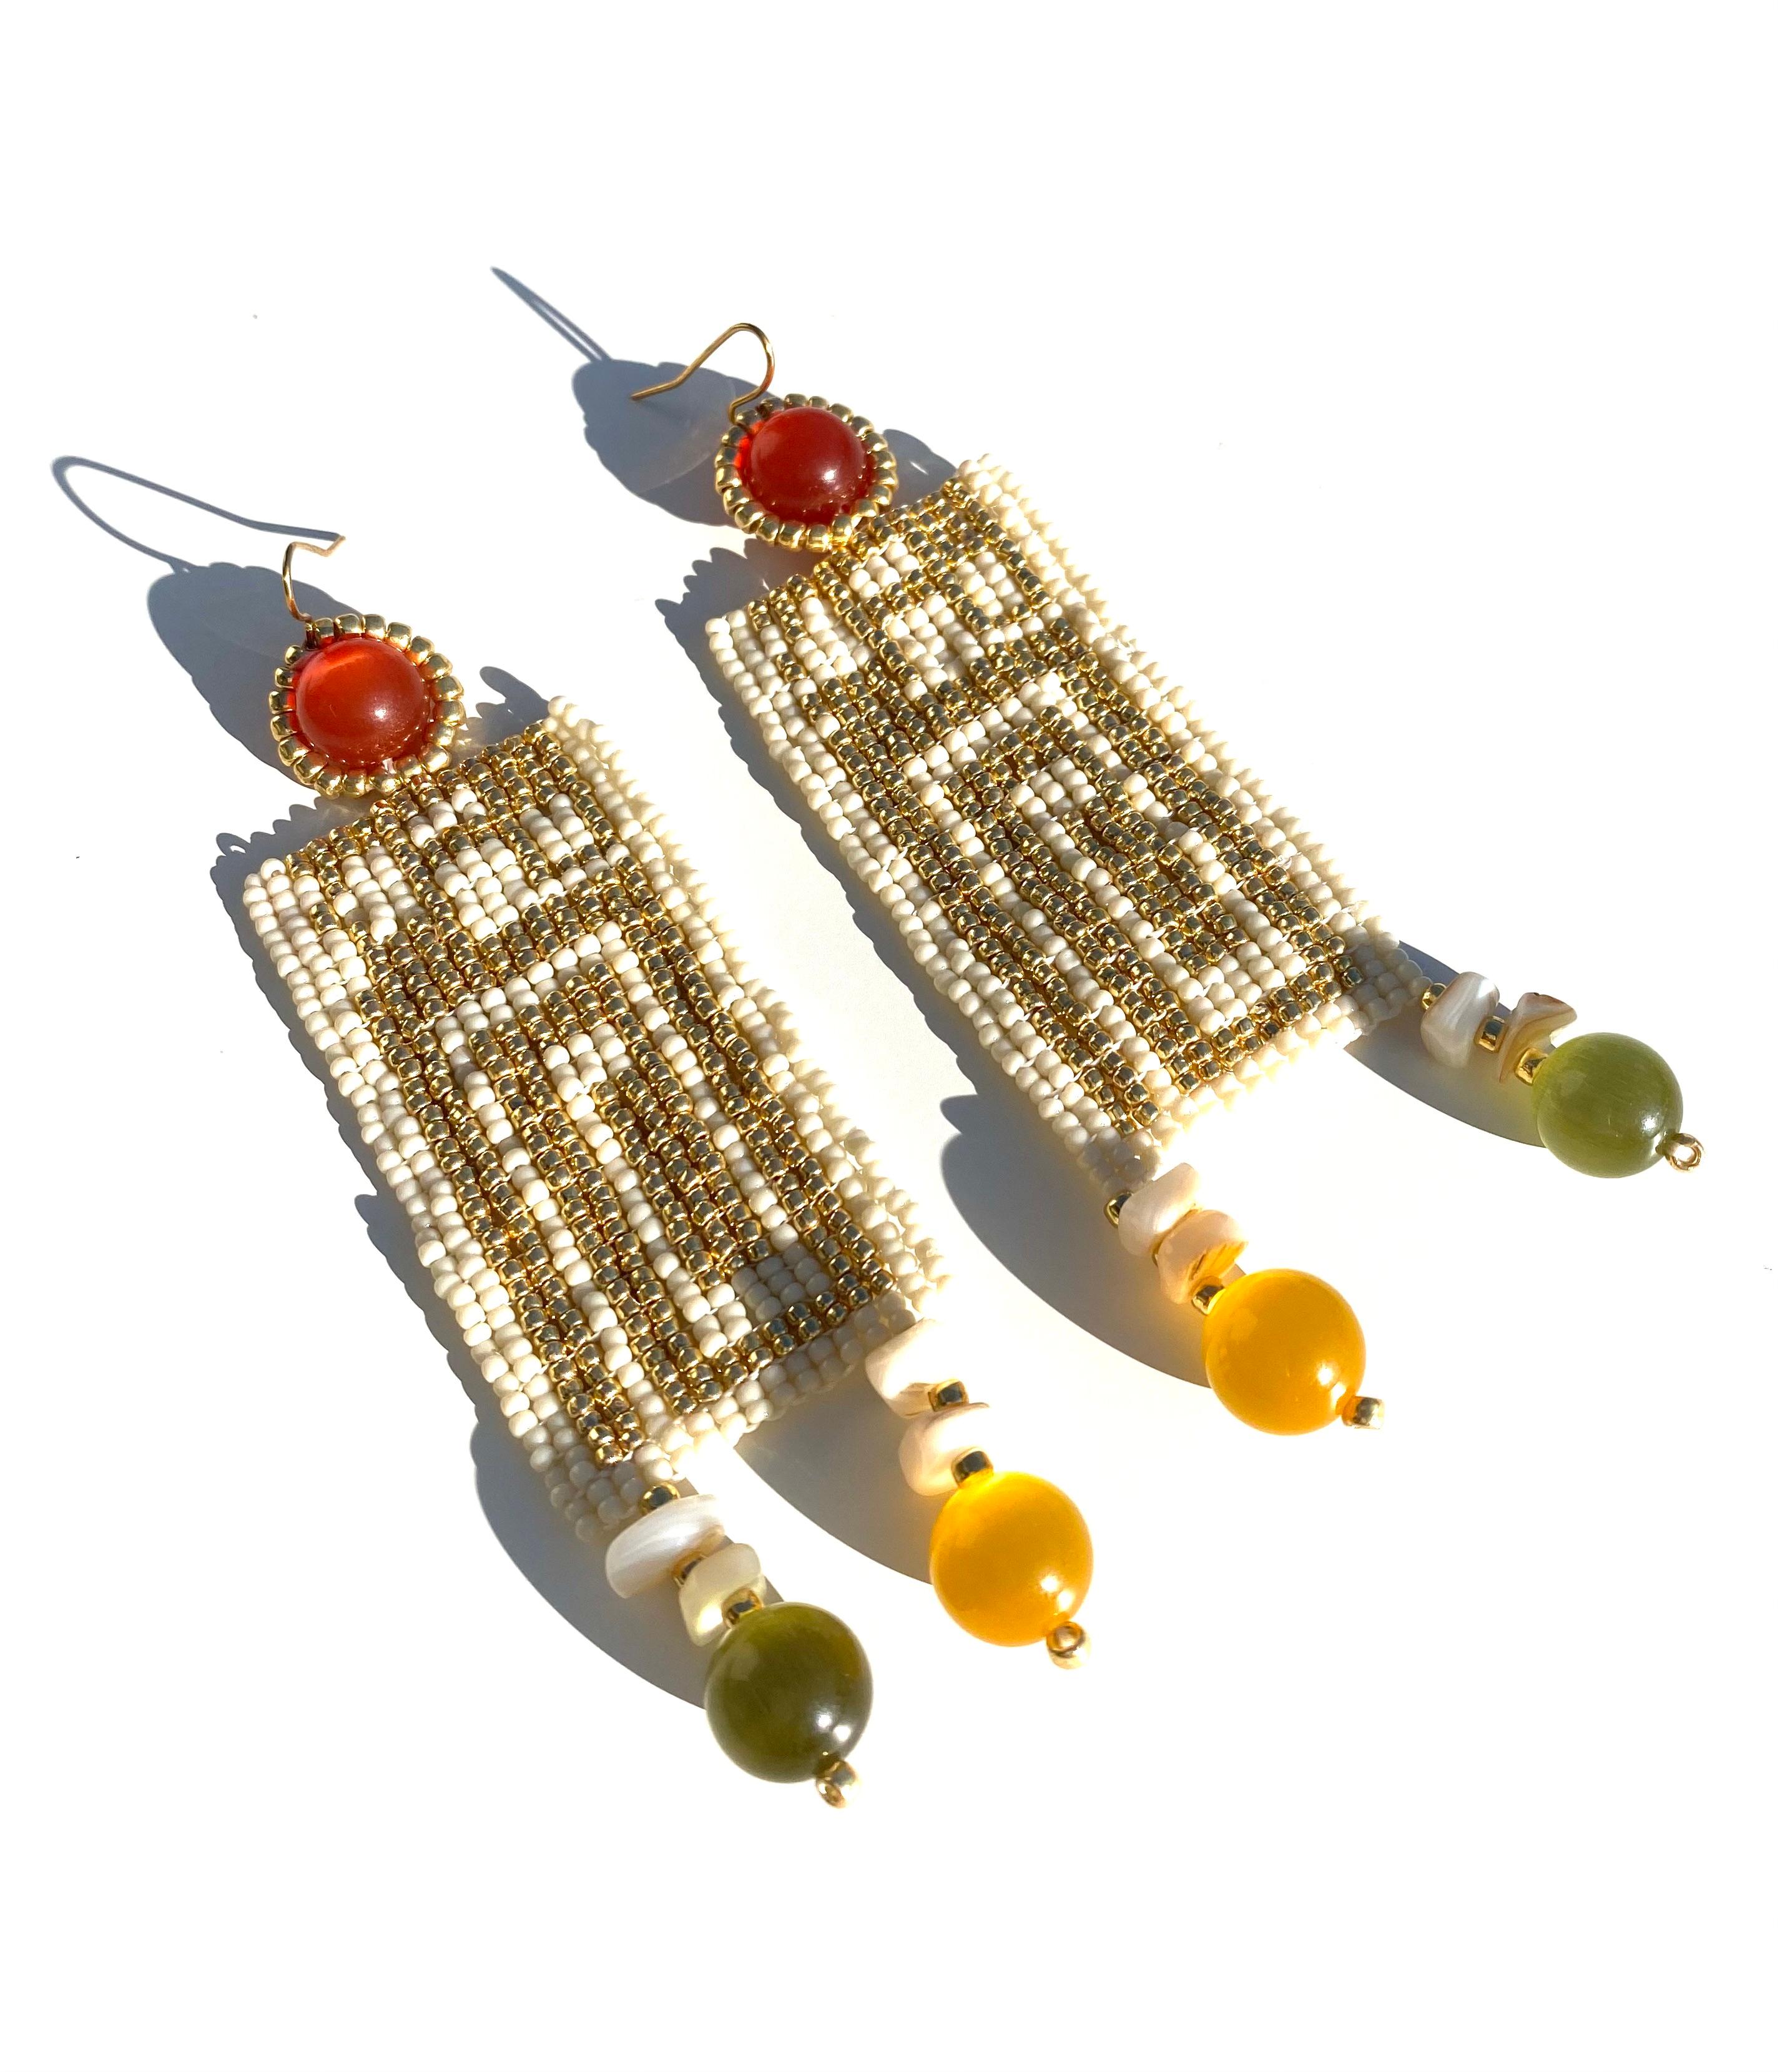 Handwoven pattern in 14k permanent gold-plated glass Japanese seed beads and ivory white seed beads.  Cat's eye glass breads in marigold and olive green and conch shell beads. Gold filled ear wires. 
Inspired by puertorican innovative and iconic